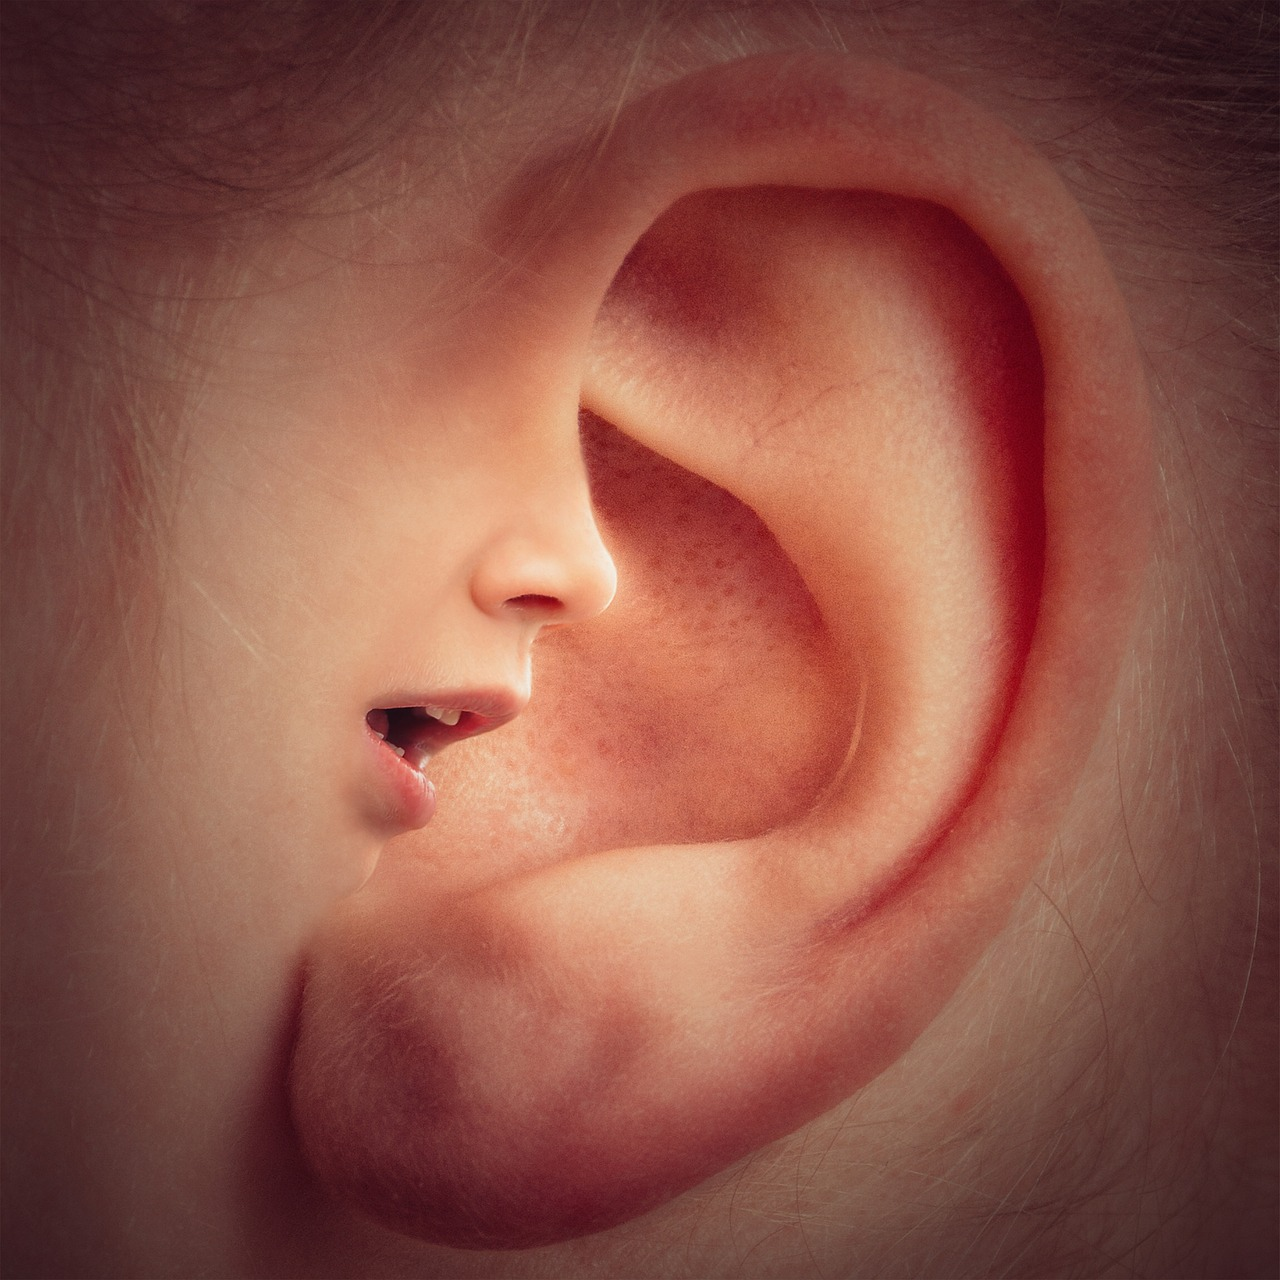 Interesting-Facts-About-Ears